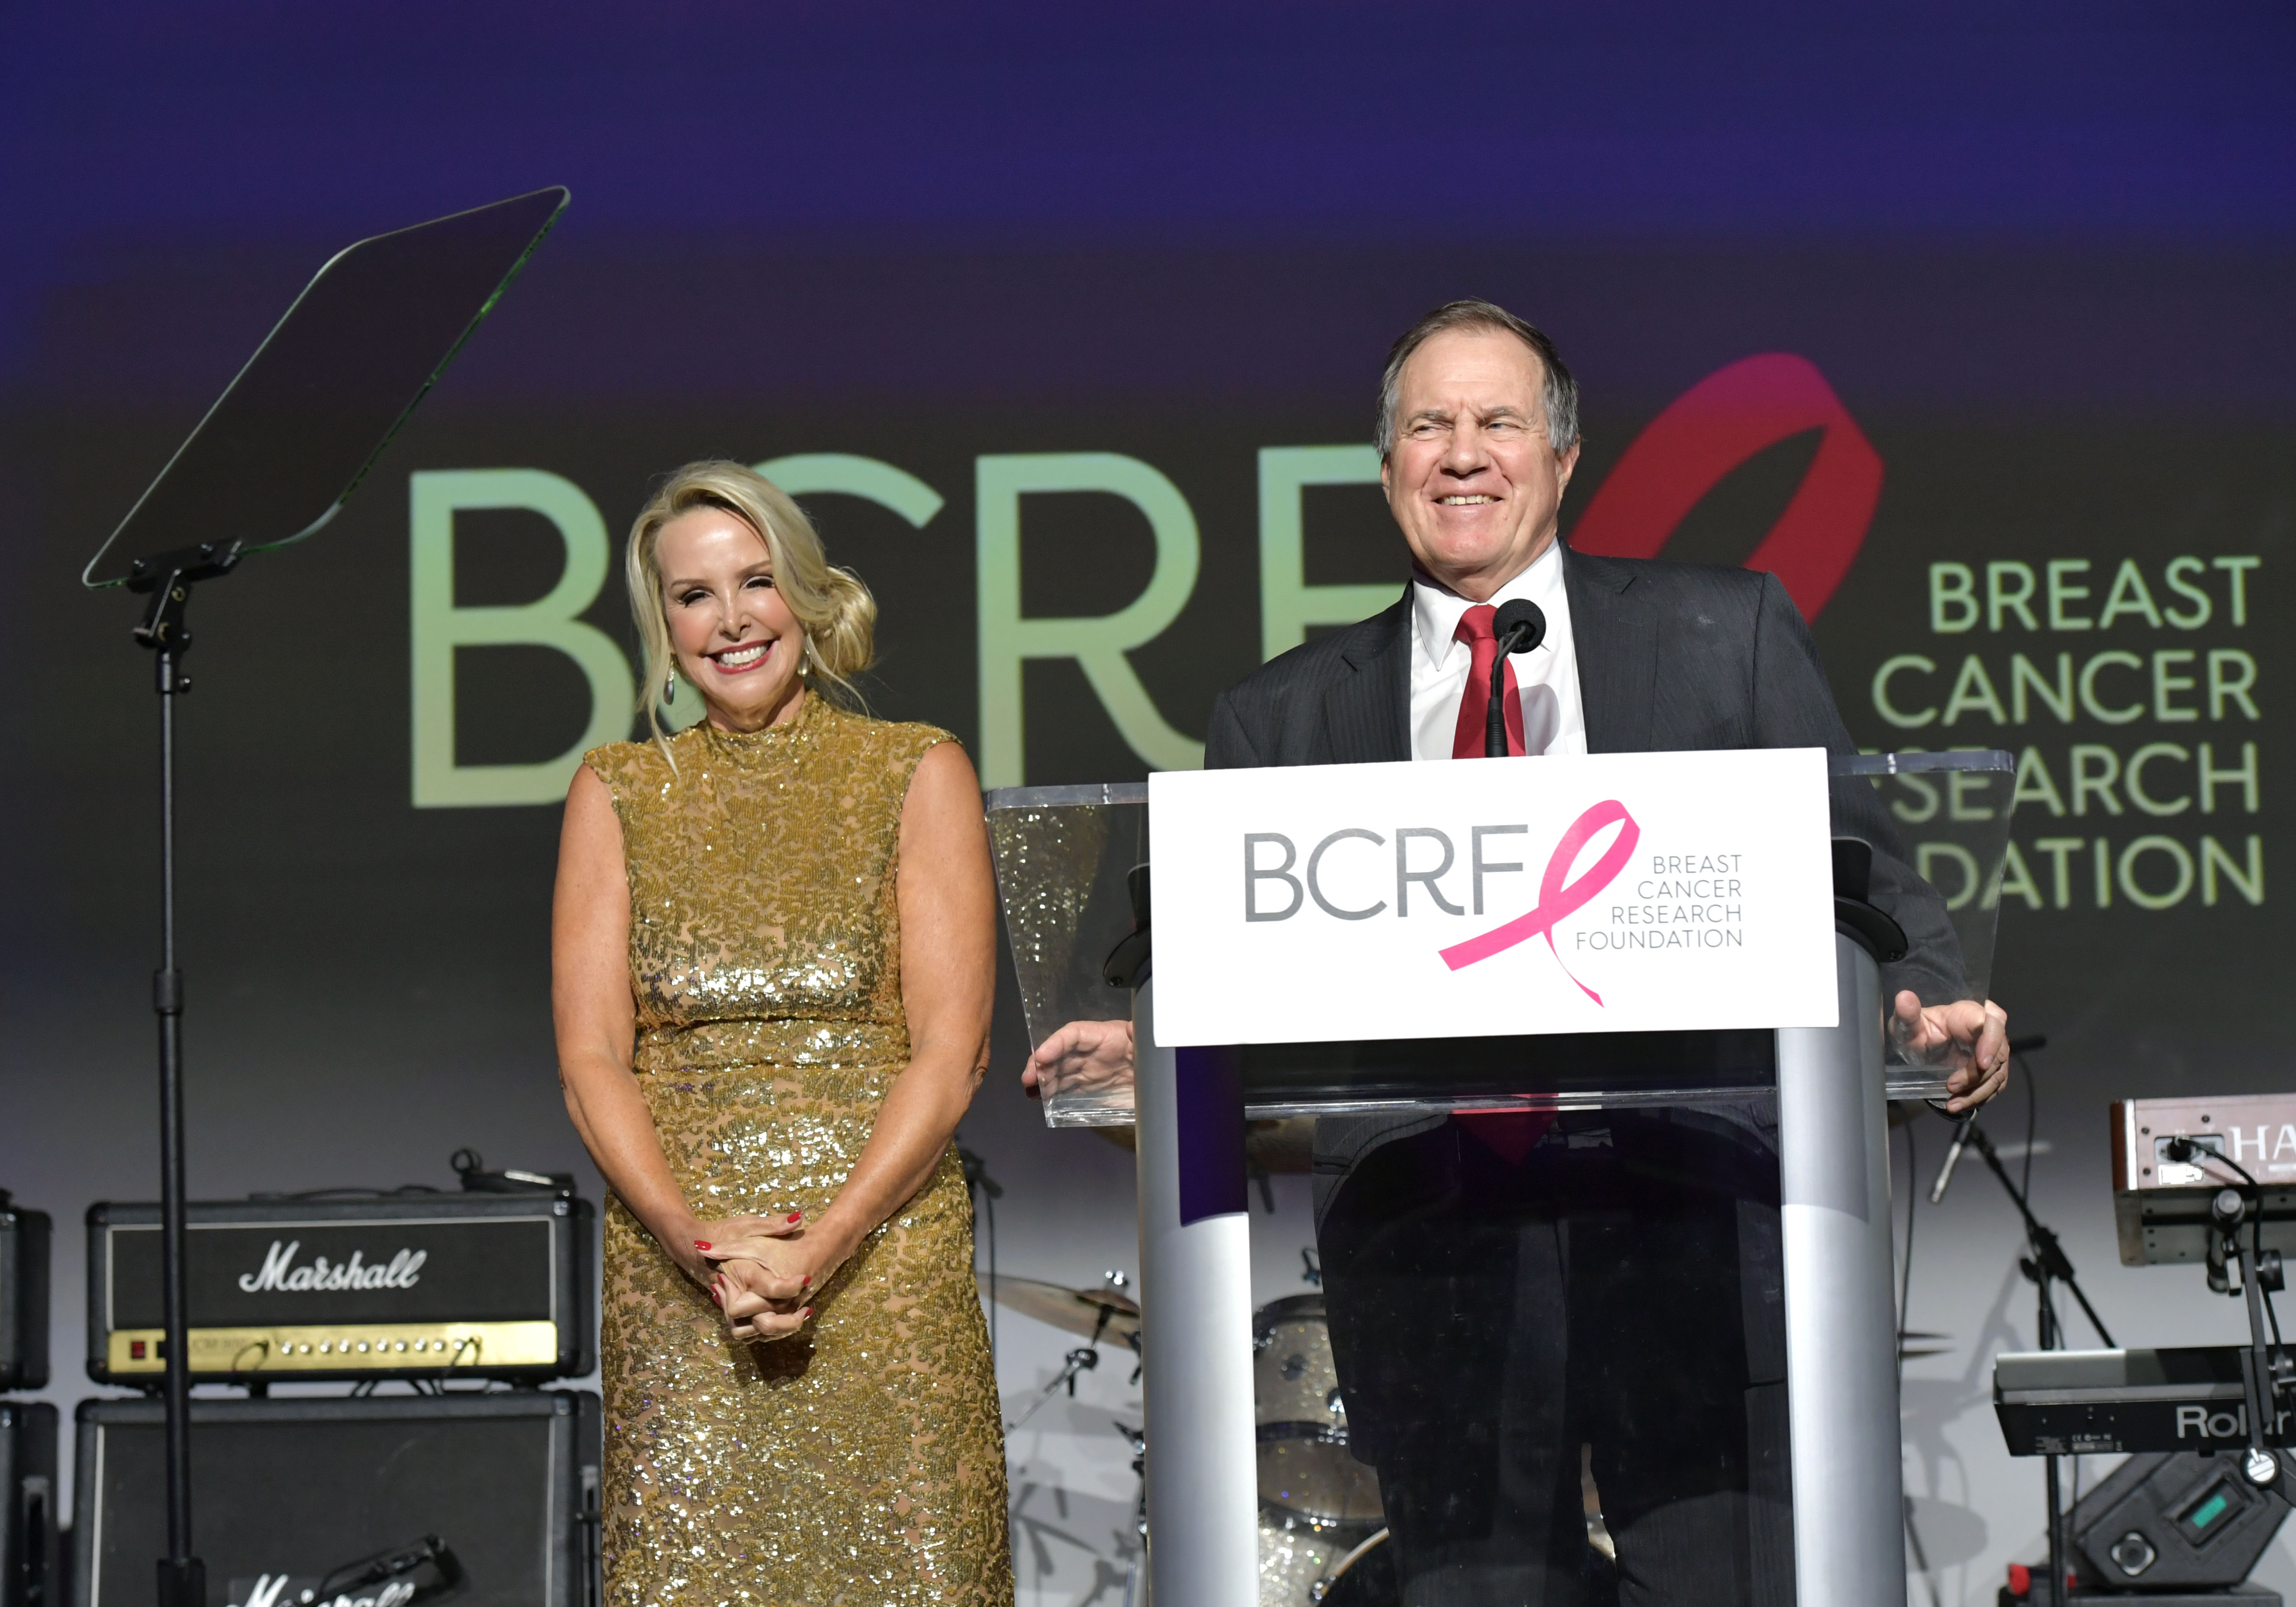 Linda Holliday and Bill Belichick on stage at the Breast Cancer Research Foundation's Boston Hot Pink Party in 2019, in Boston, Massachusetts. | Source: Getty Images